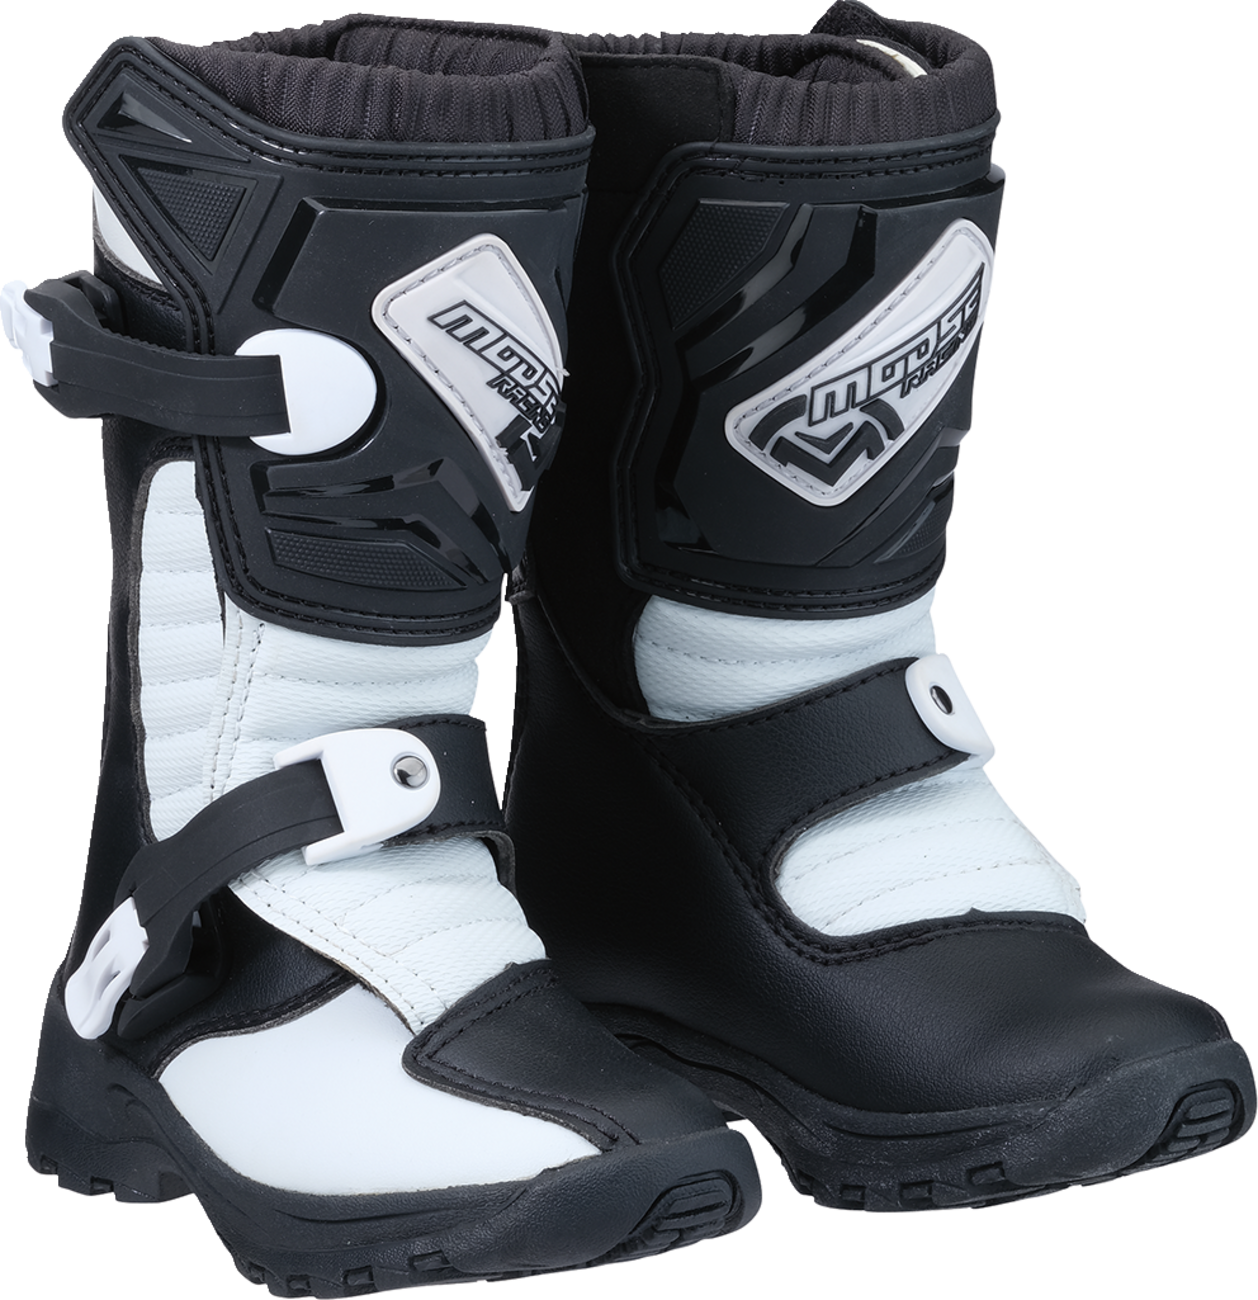 MOOSE RACING M1.3 Boots - Black/White - Size 1 3411-0430